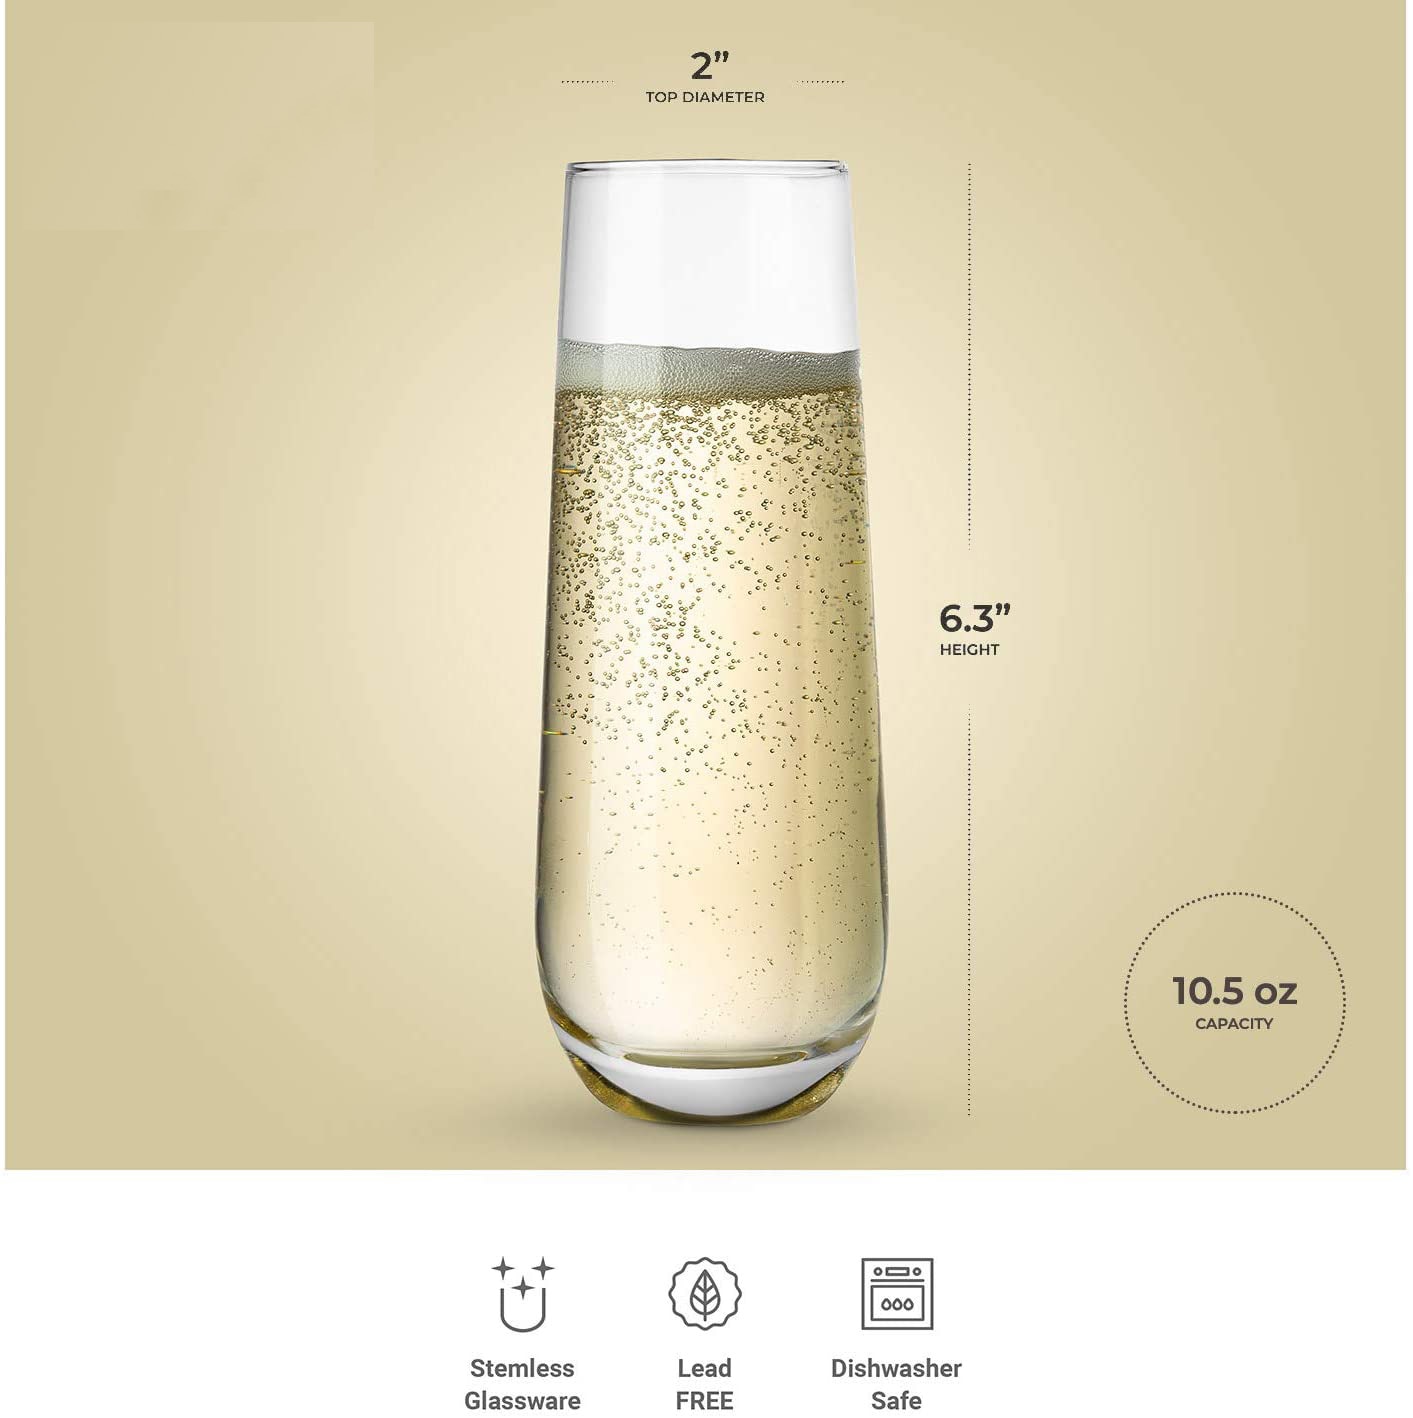 Stemless Champagne Flute Glasses All-Purpose Wine Drinking Glassware Beverage Cups for Water, Juice, Beer, Liquor, Whisk